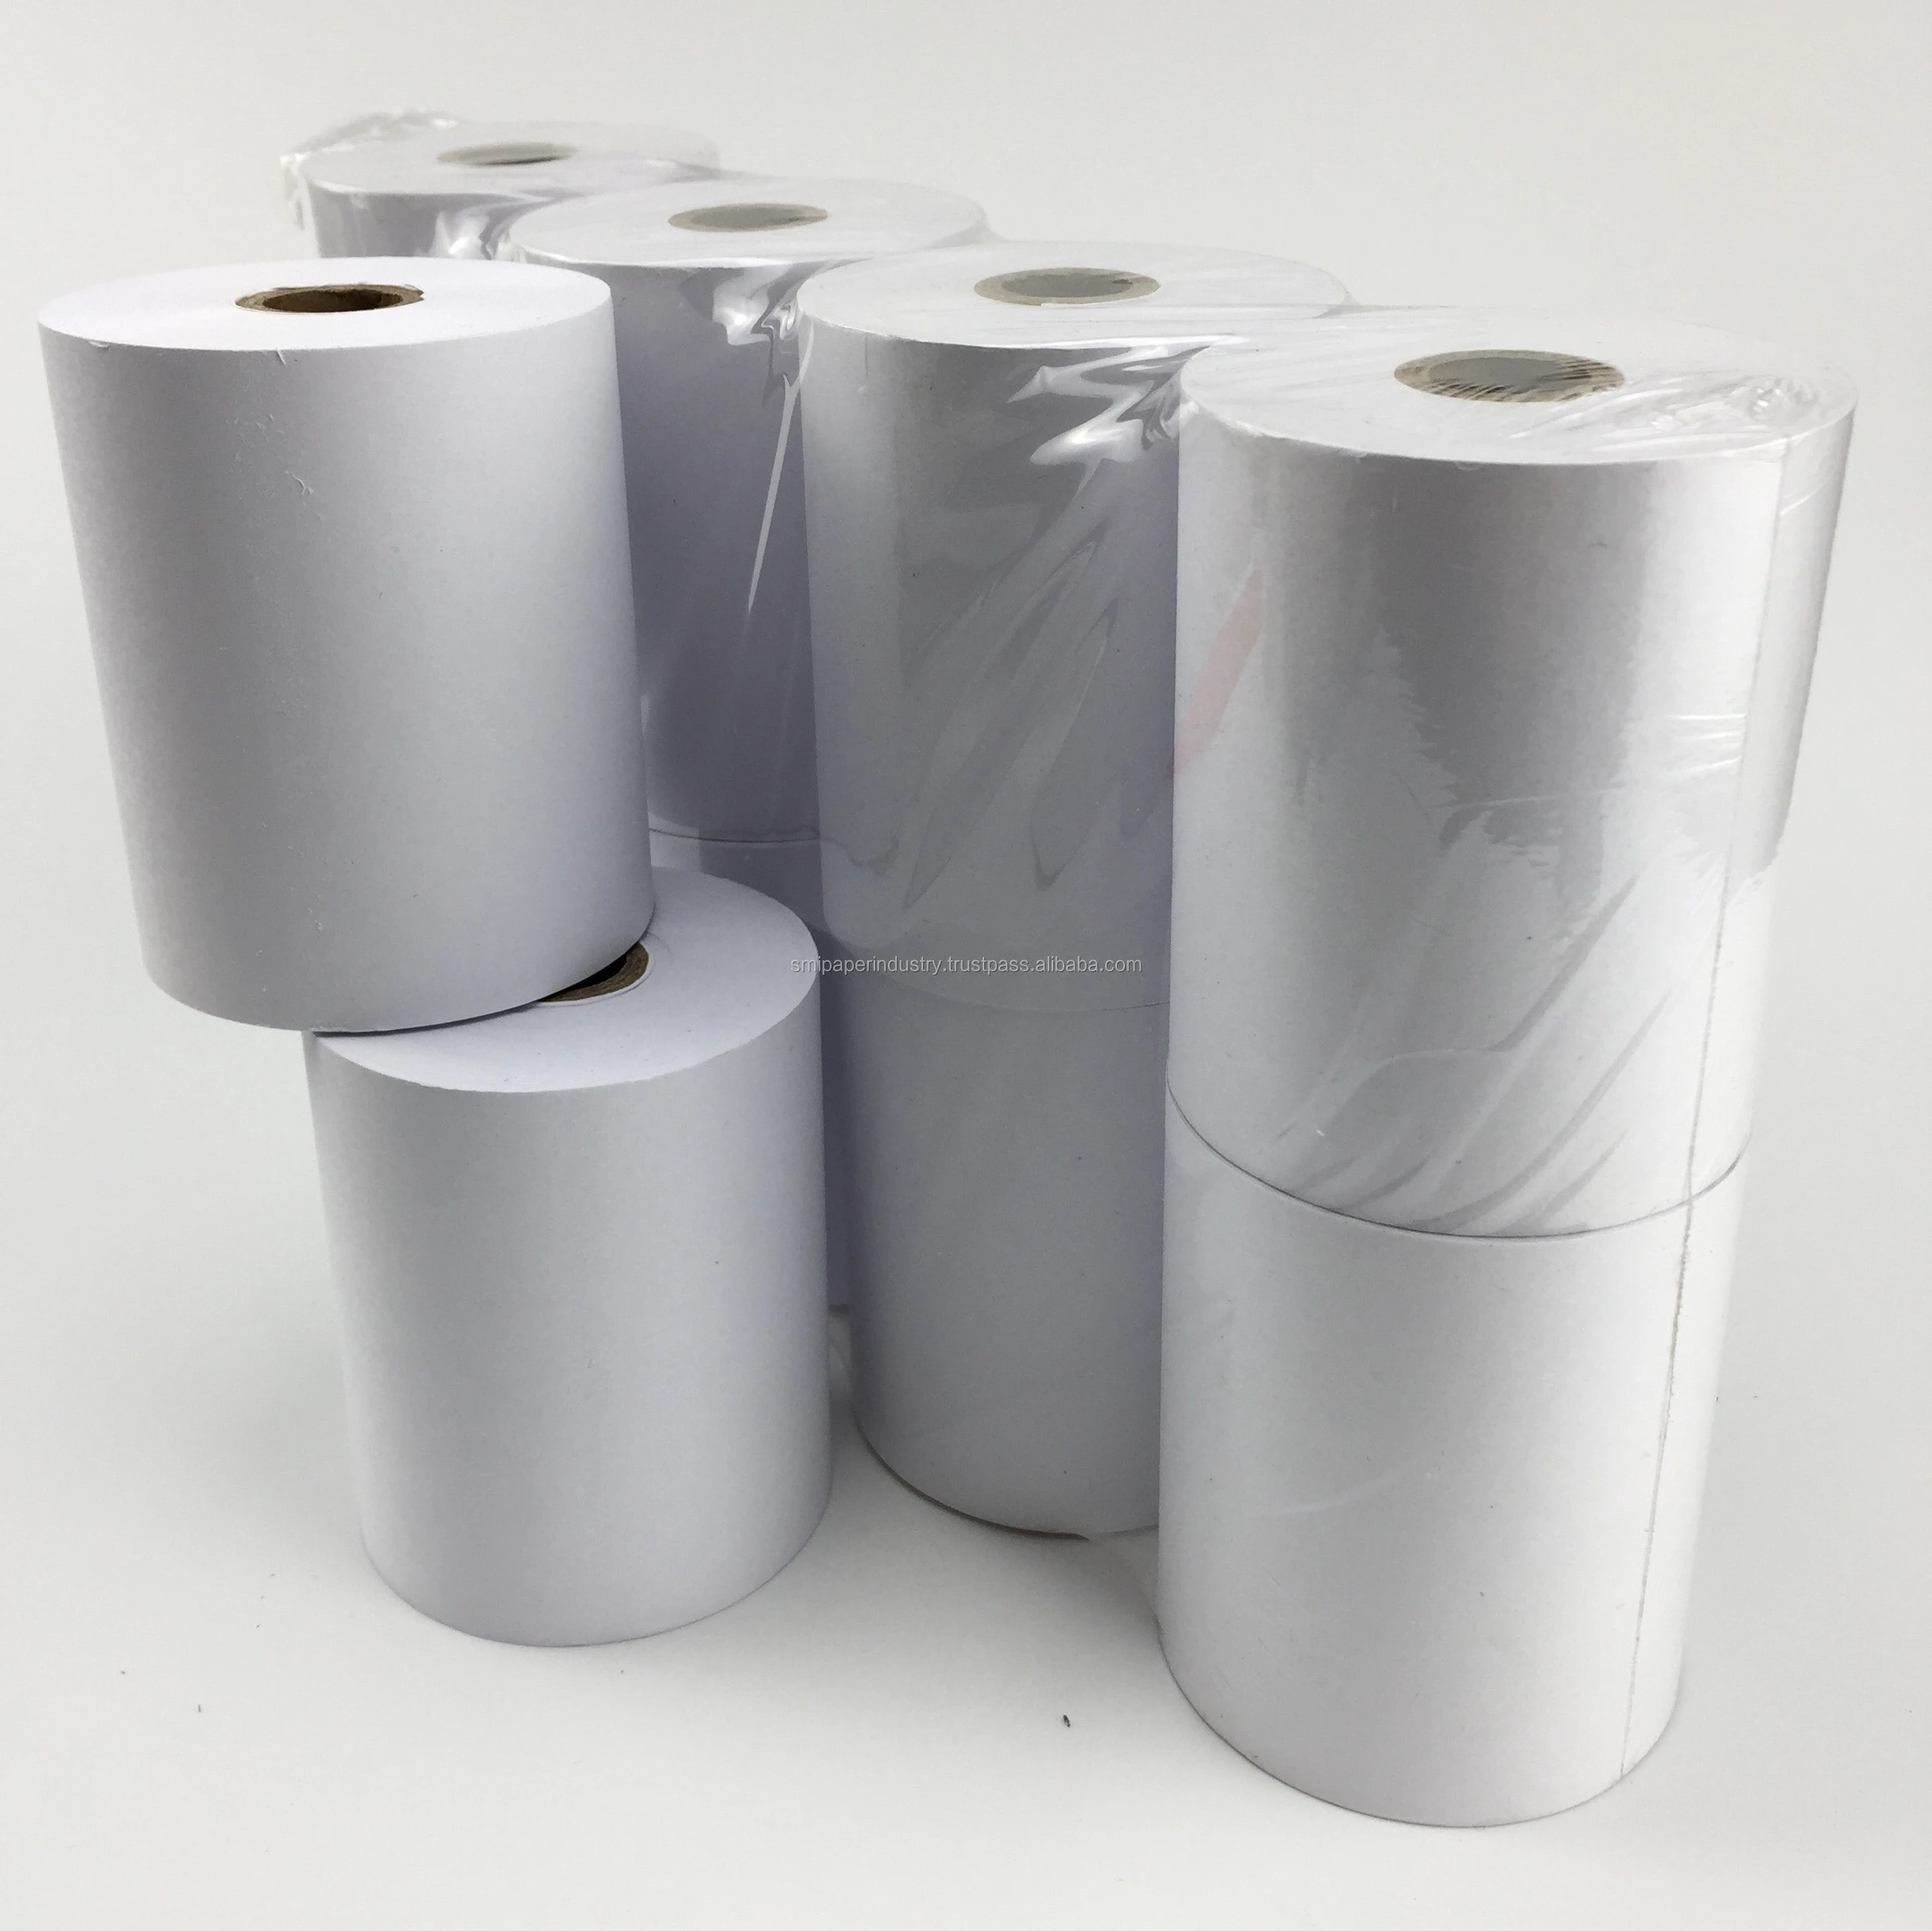 Lowest Price 80x40 Portable Bluetooth Printer Thermal Paper Rolls